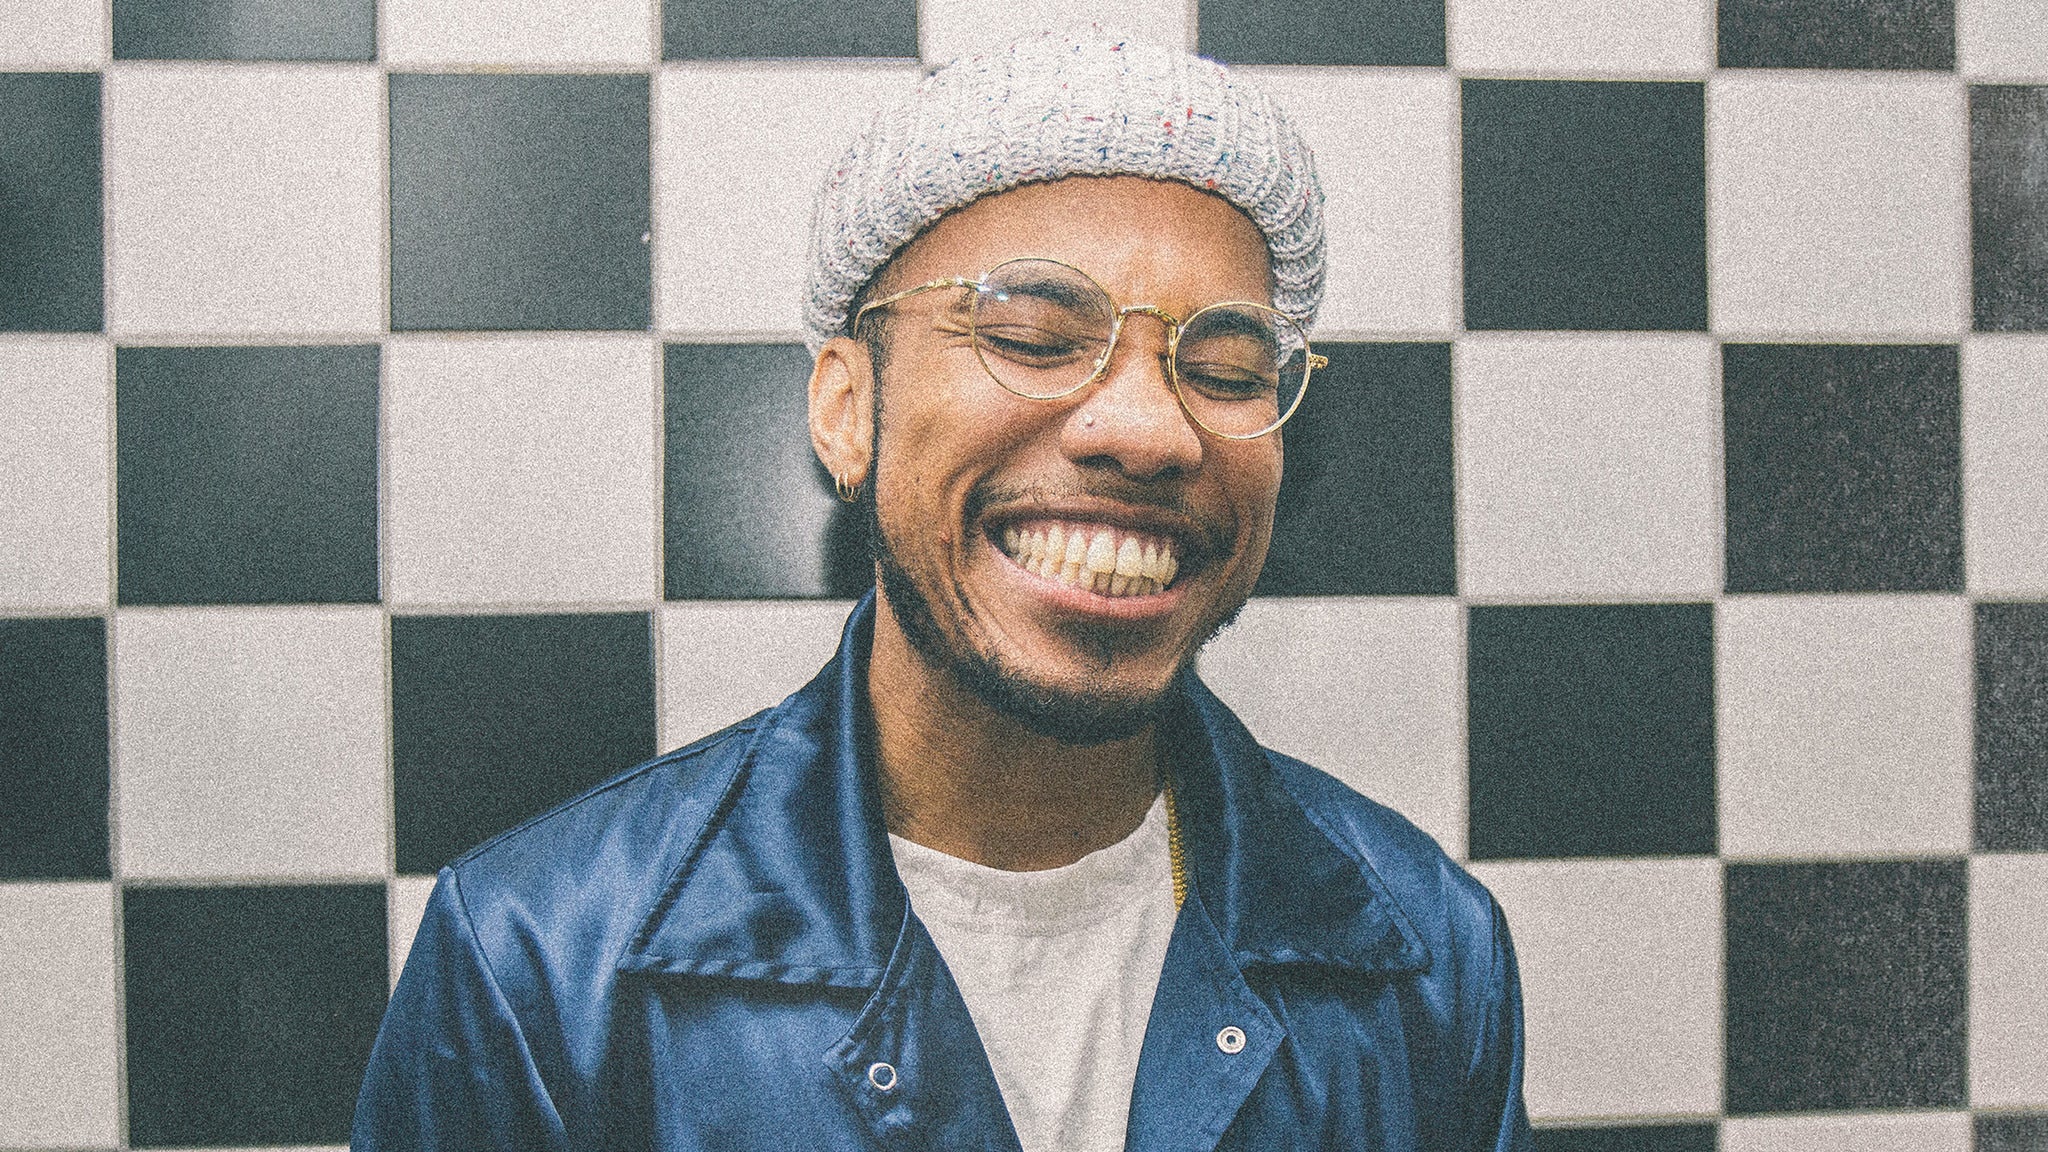 Anderson .Paak & The Free Nationals in Detroit promo photo for Artist presale offer code